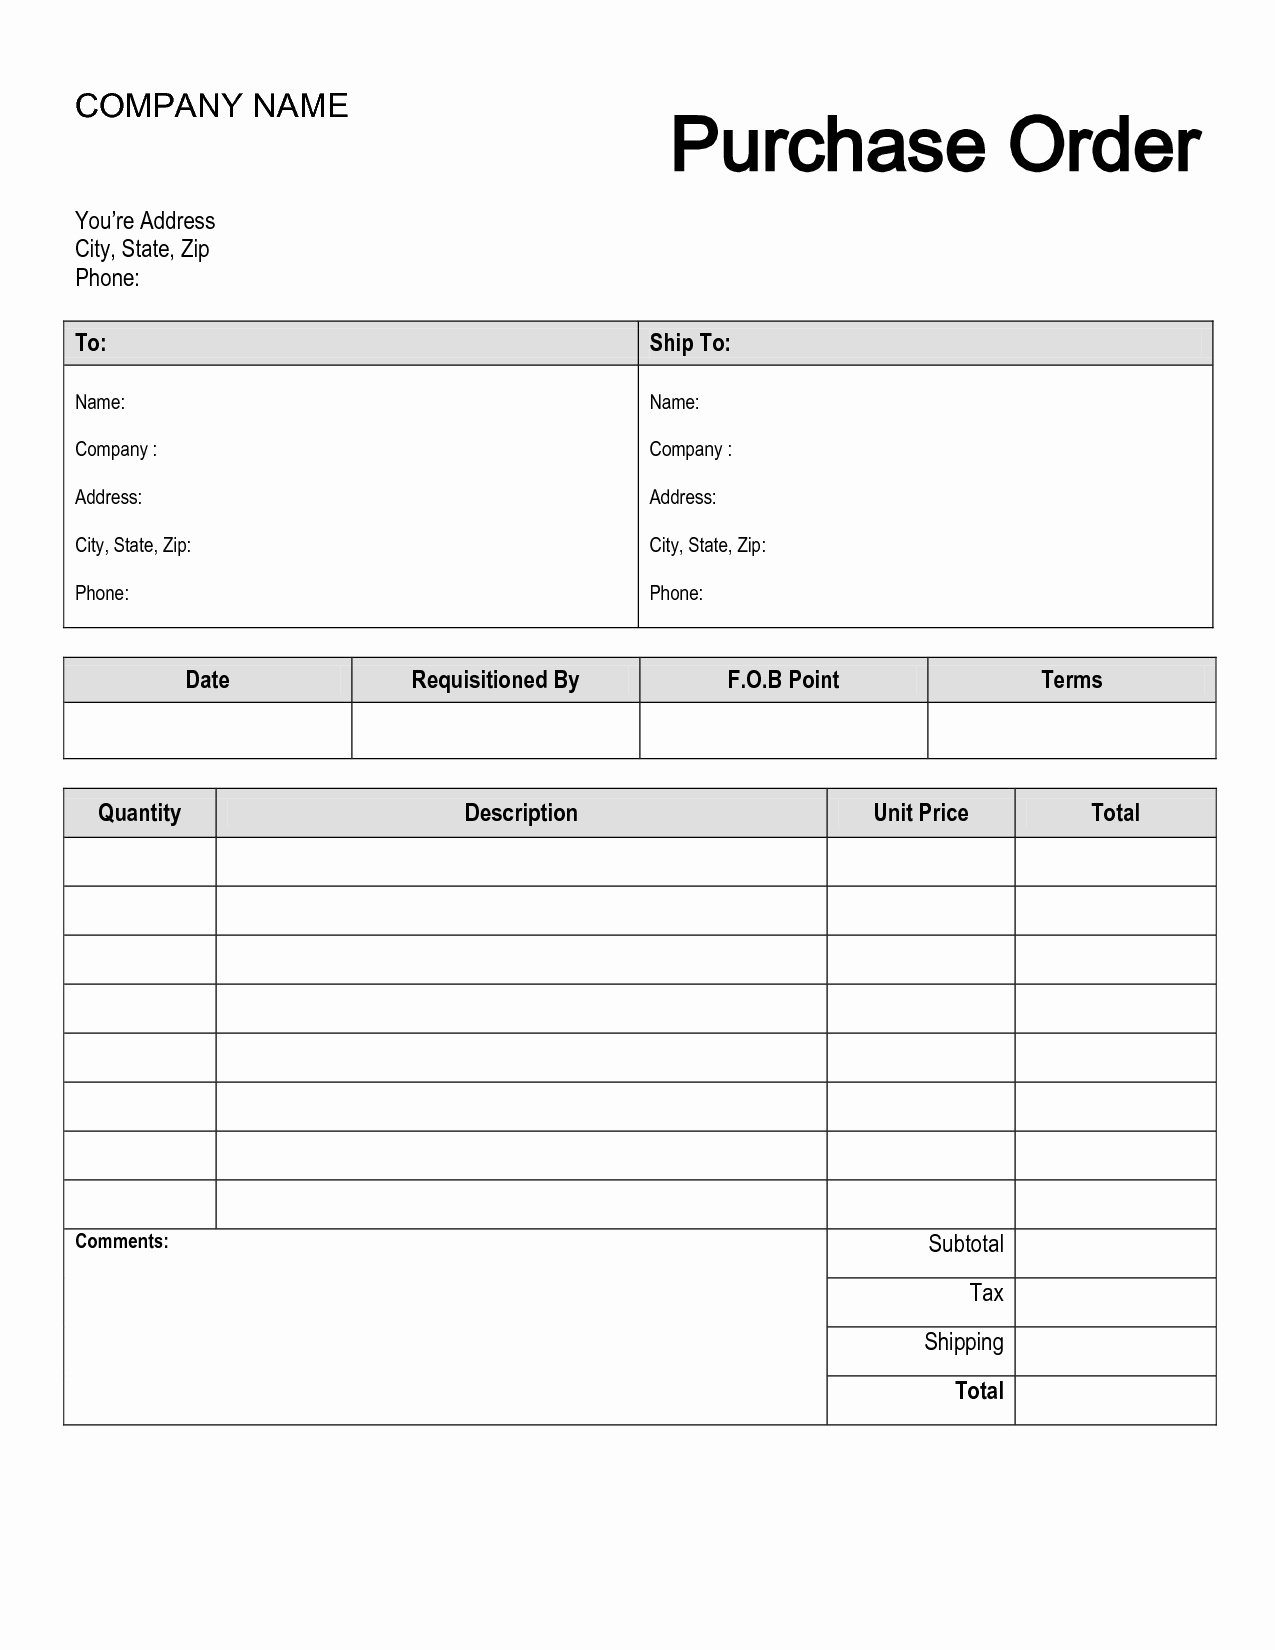 Purchase order Word Template Fresh Purchase order Template